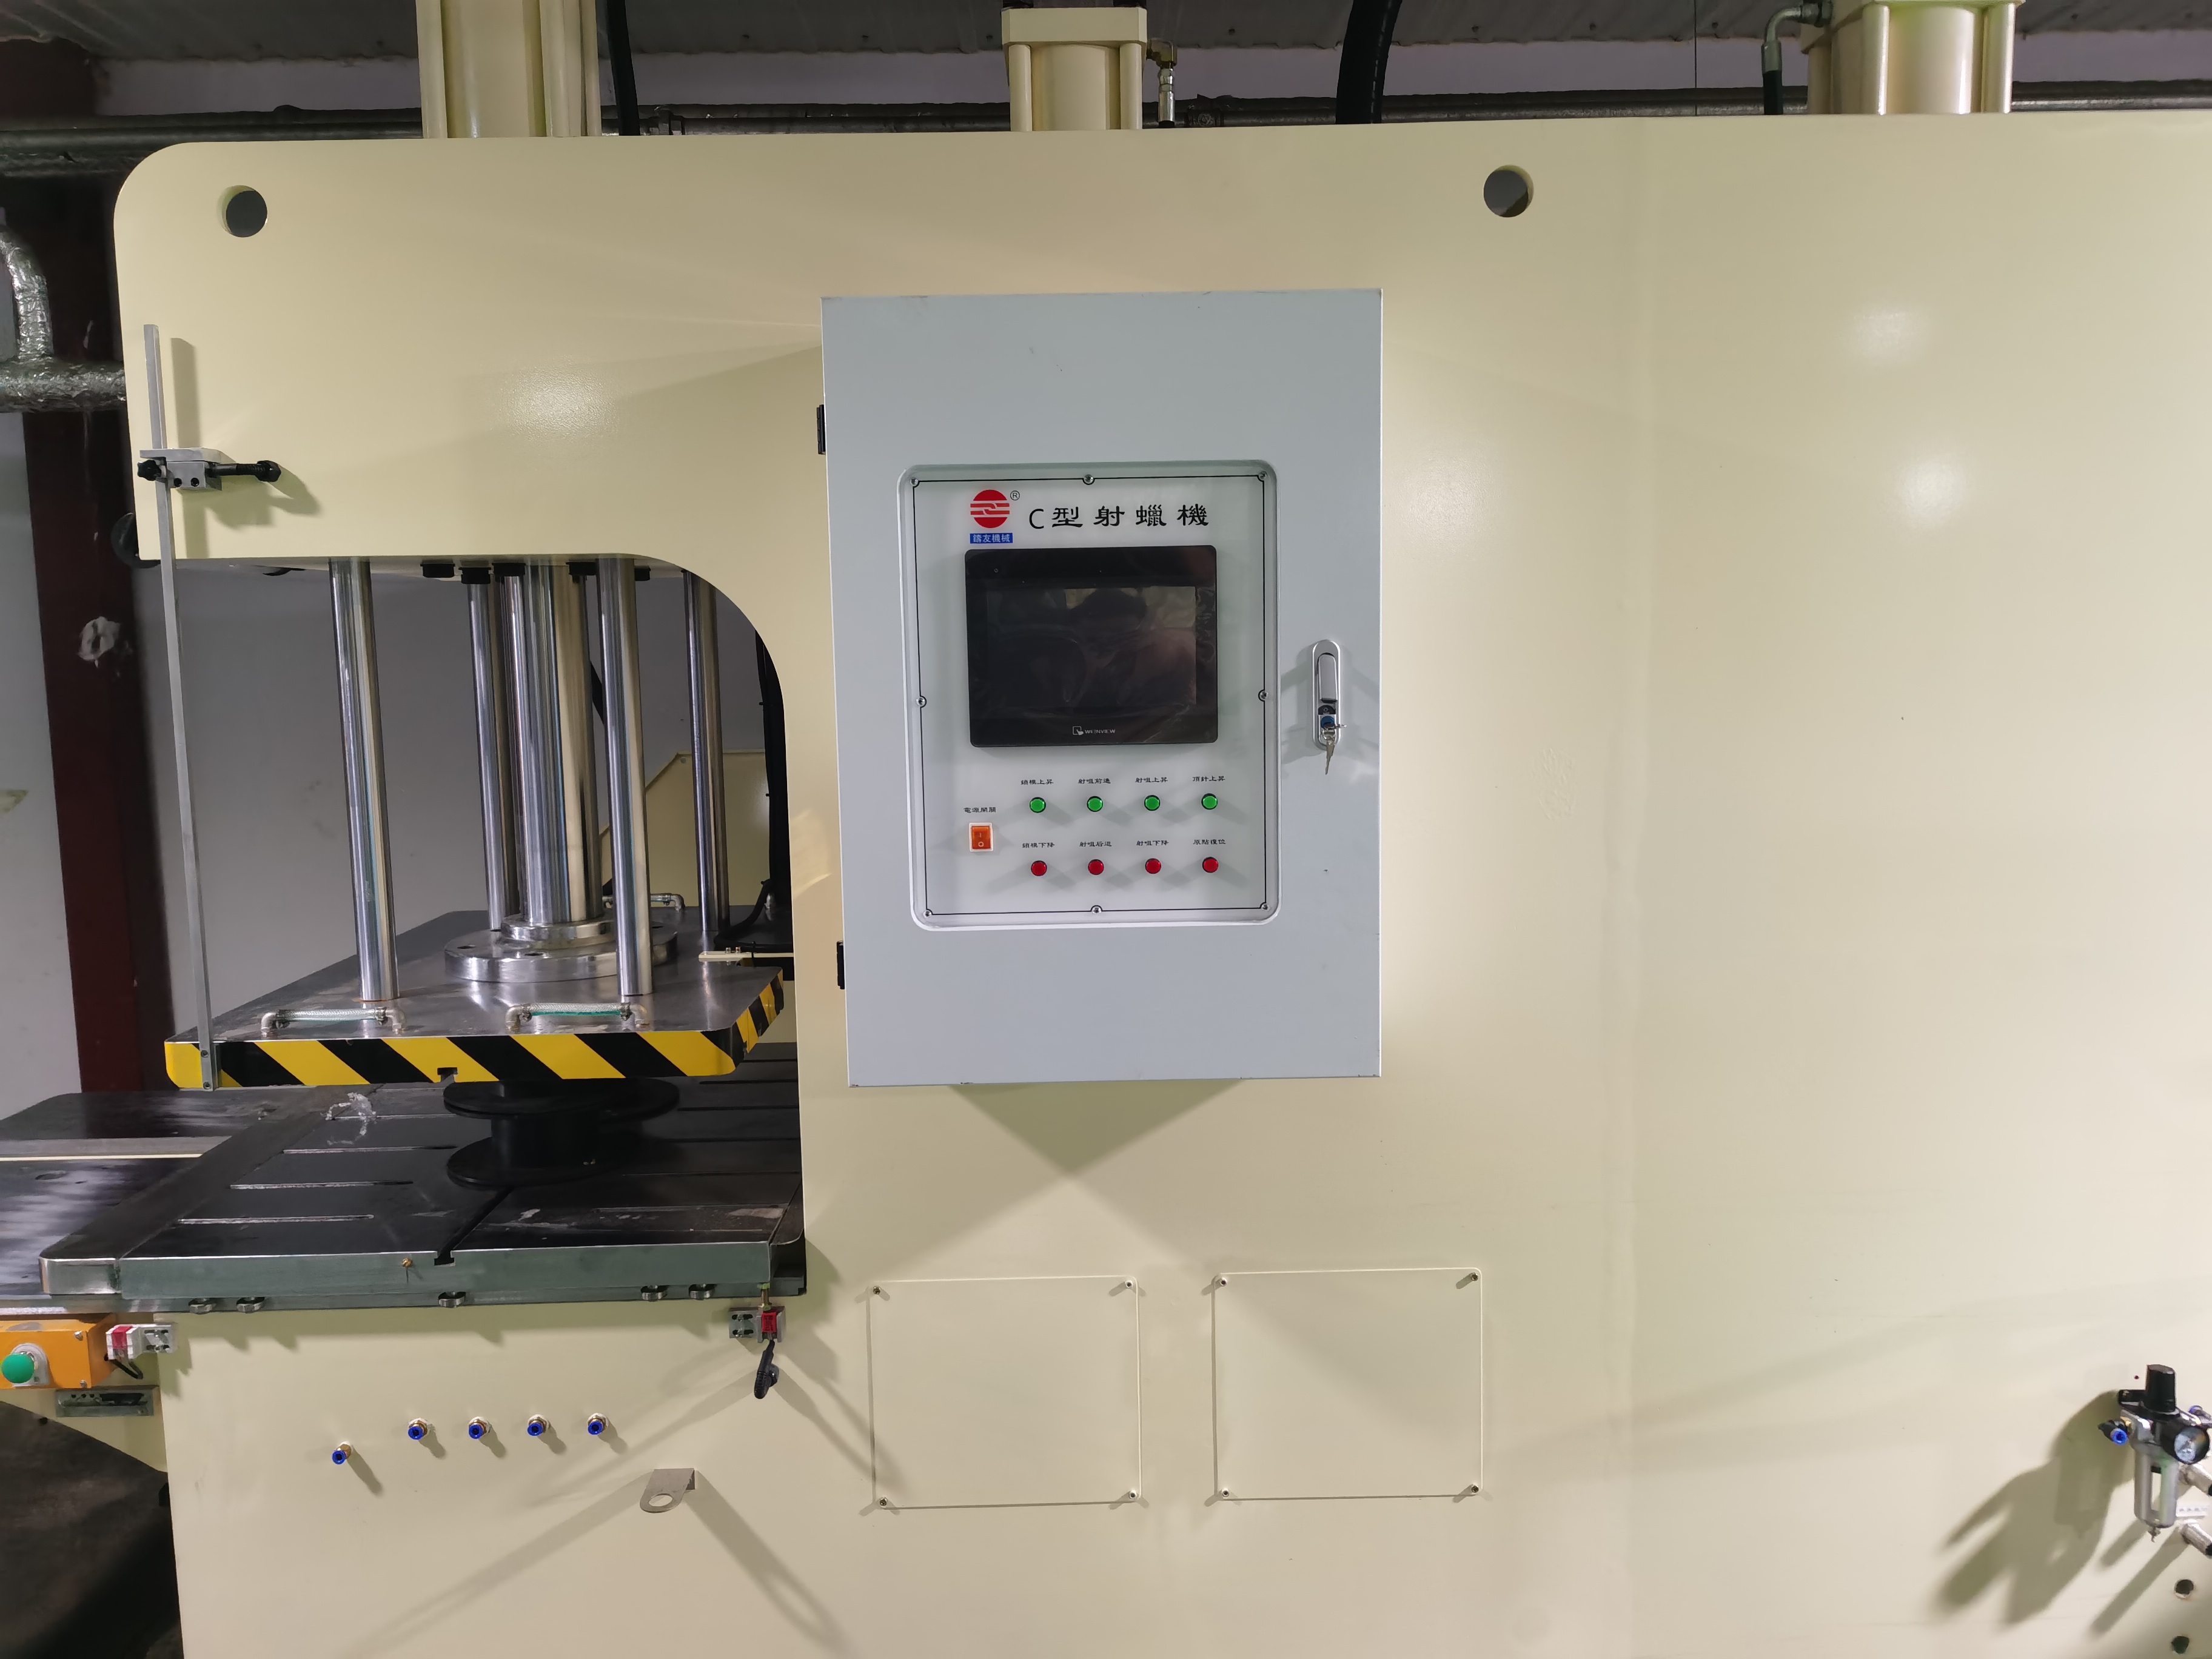 New Wax Injection Machines(图1)